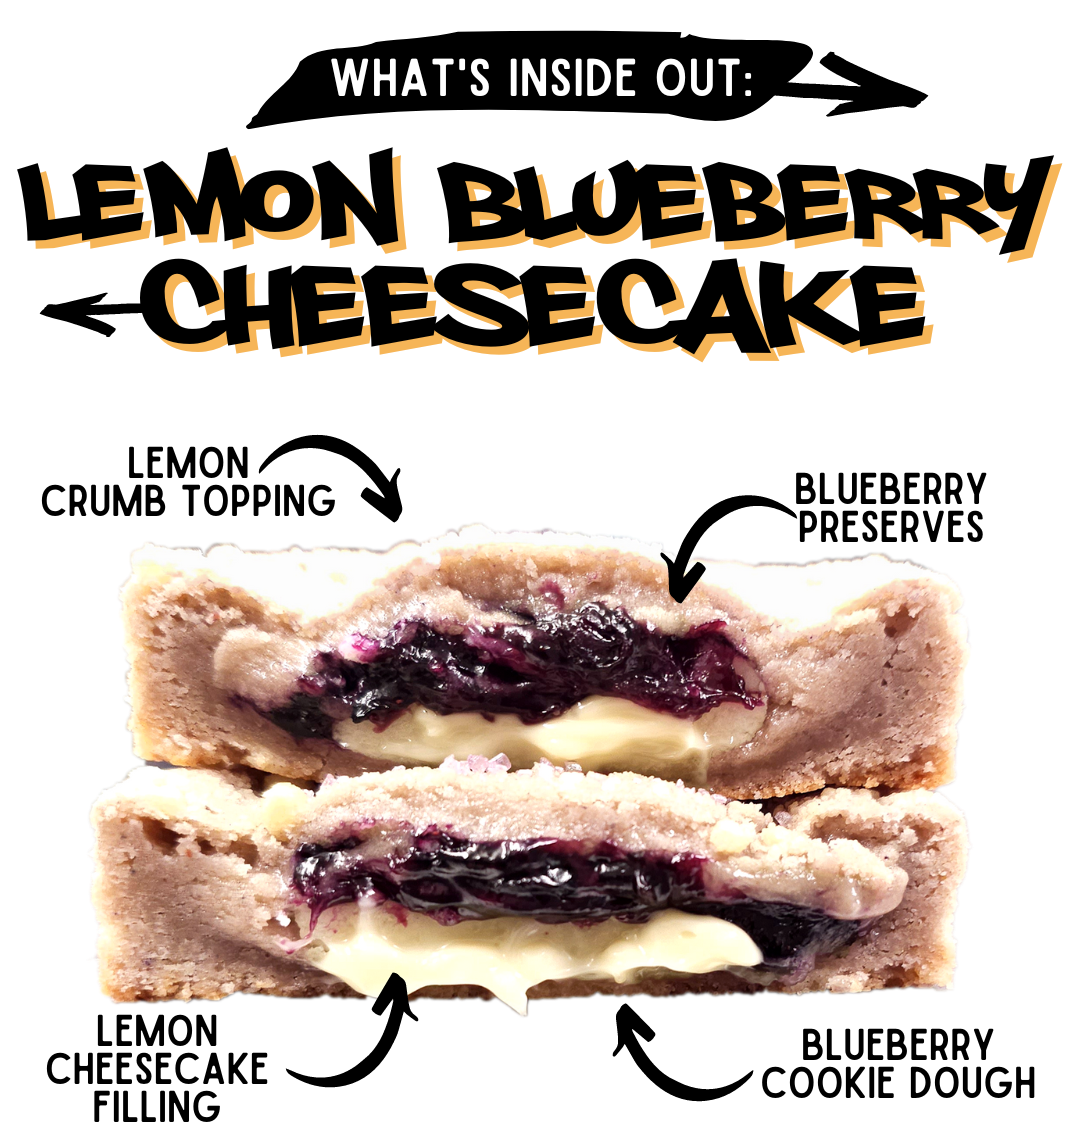 Inside Out Cookie What's inside the lemon blueberry cheesecake stuffed cookie